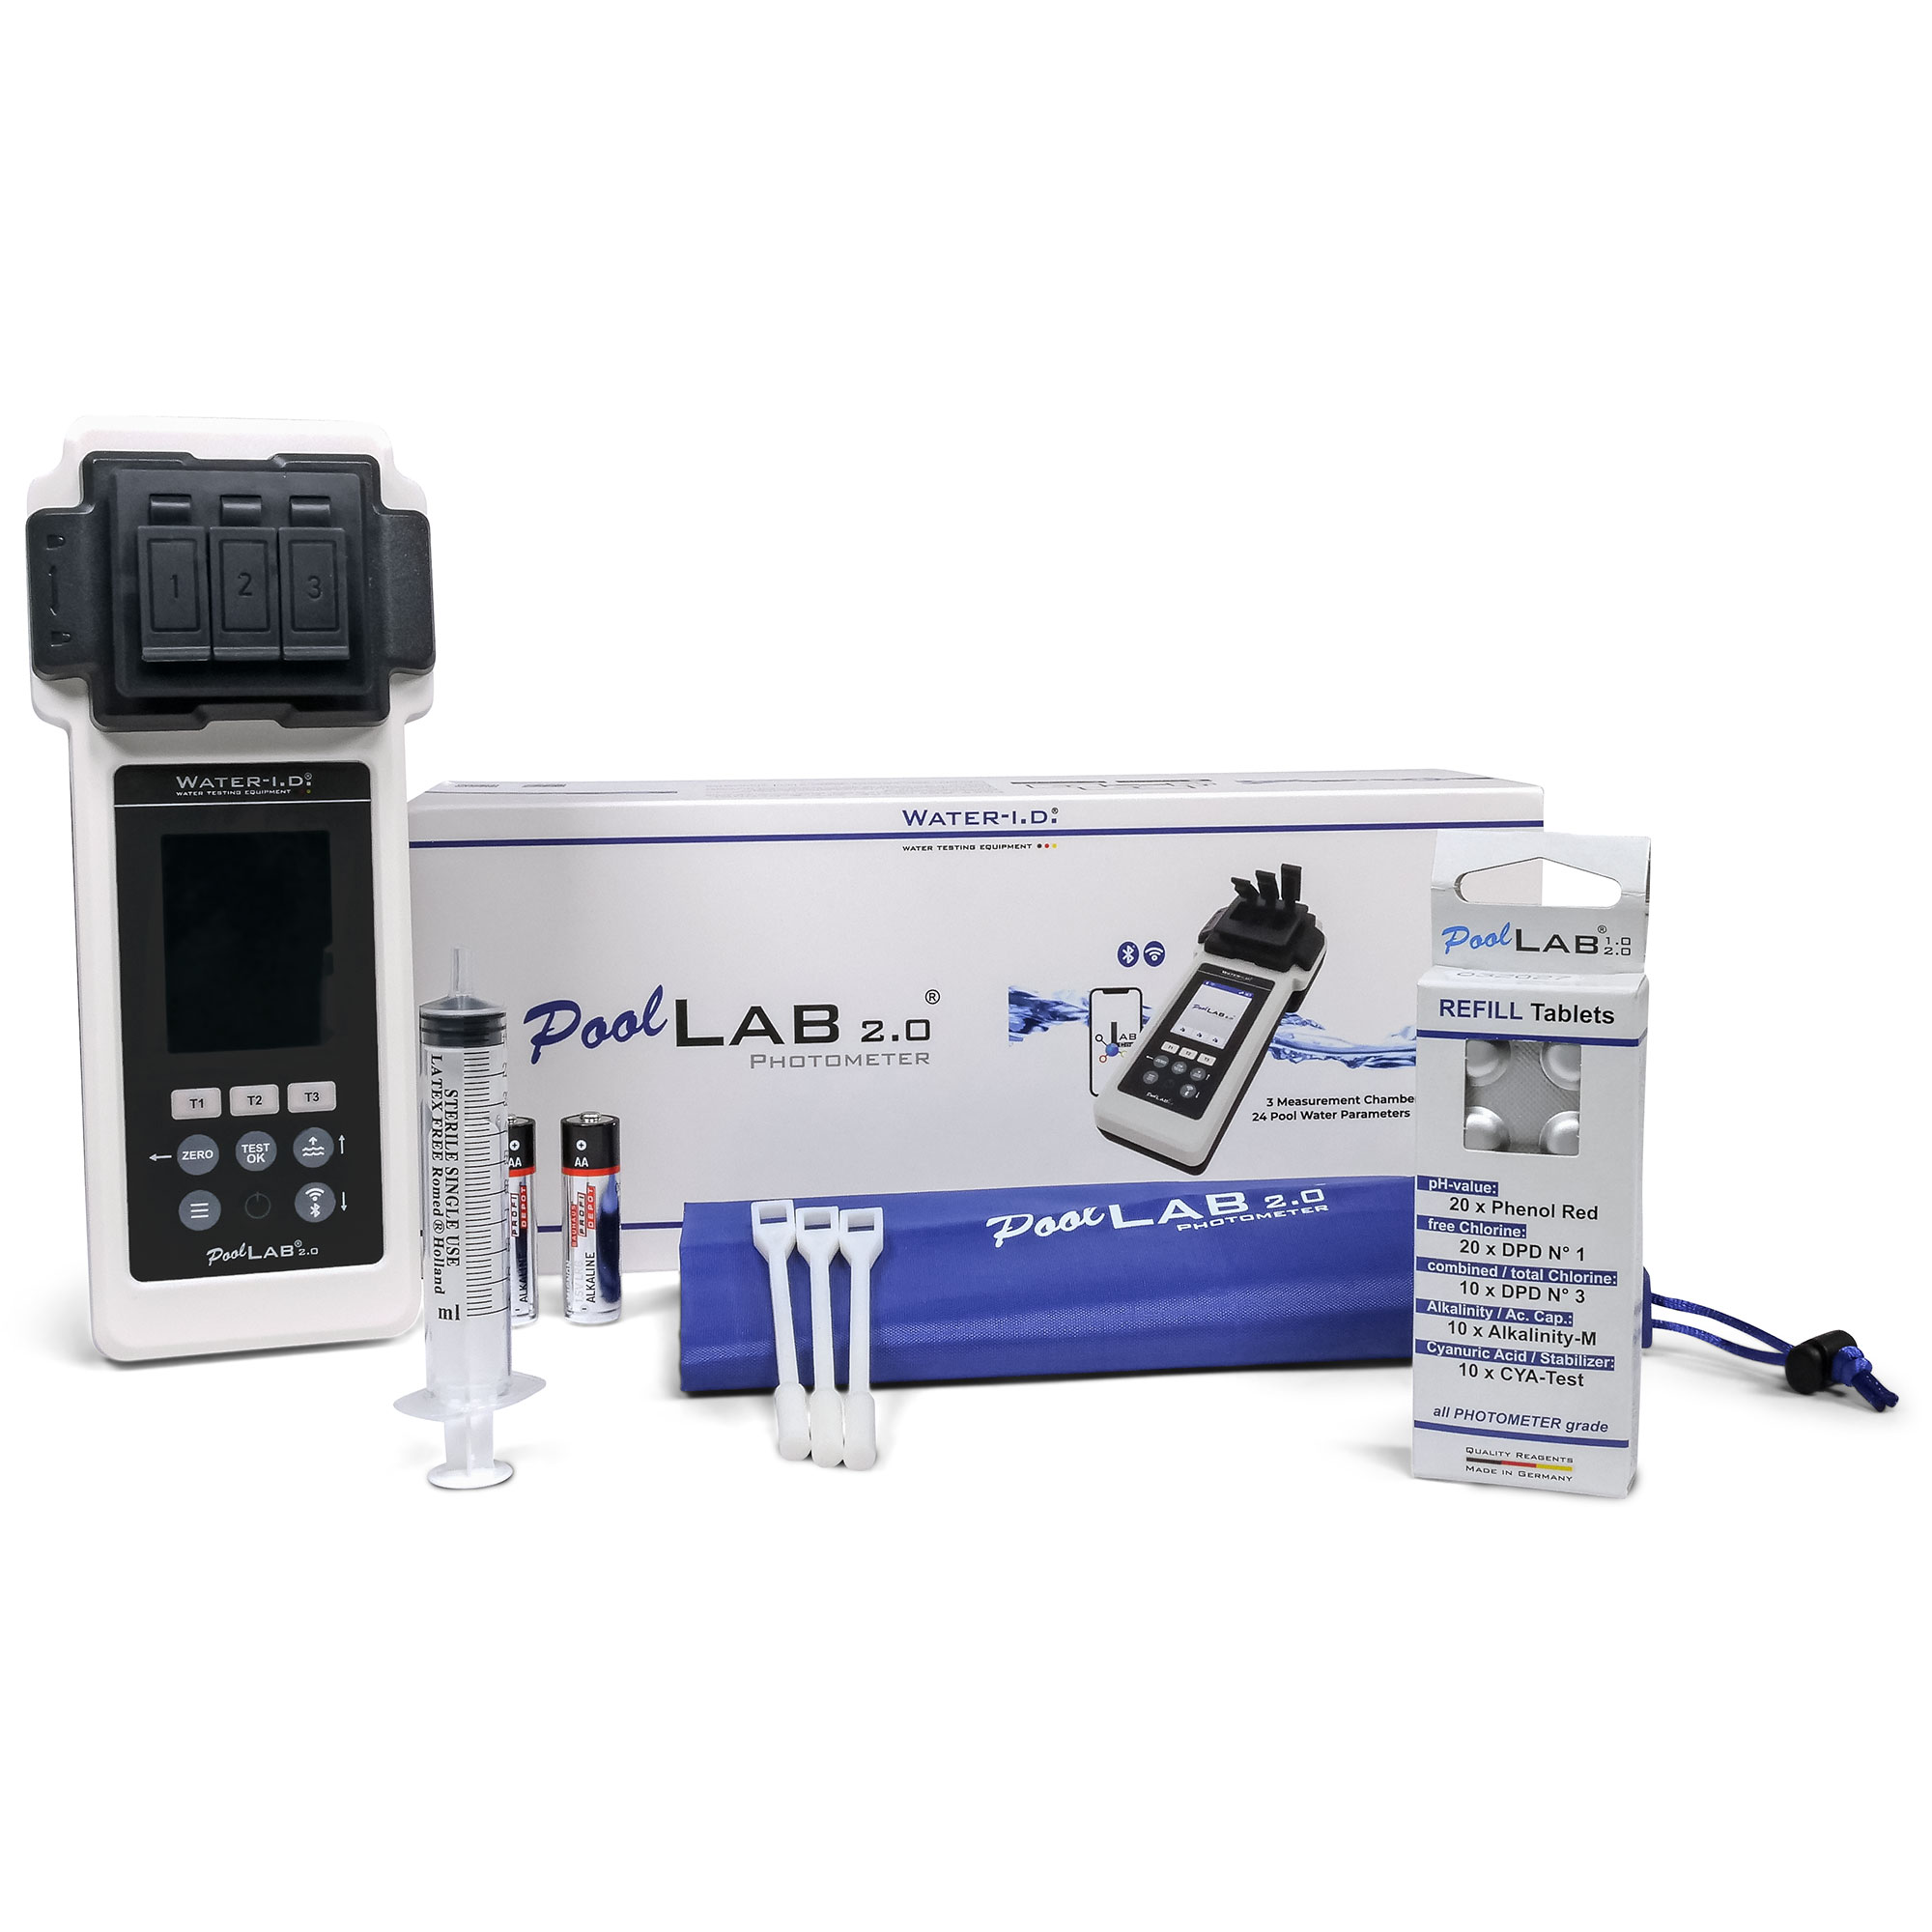 PoolLab 2.0 Photometer SPECIAL EDITION inkl. 50 Phenol Red + 50 DPD1 Testtabletten